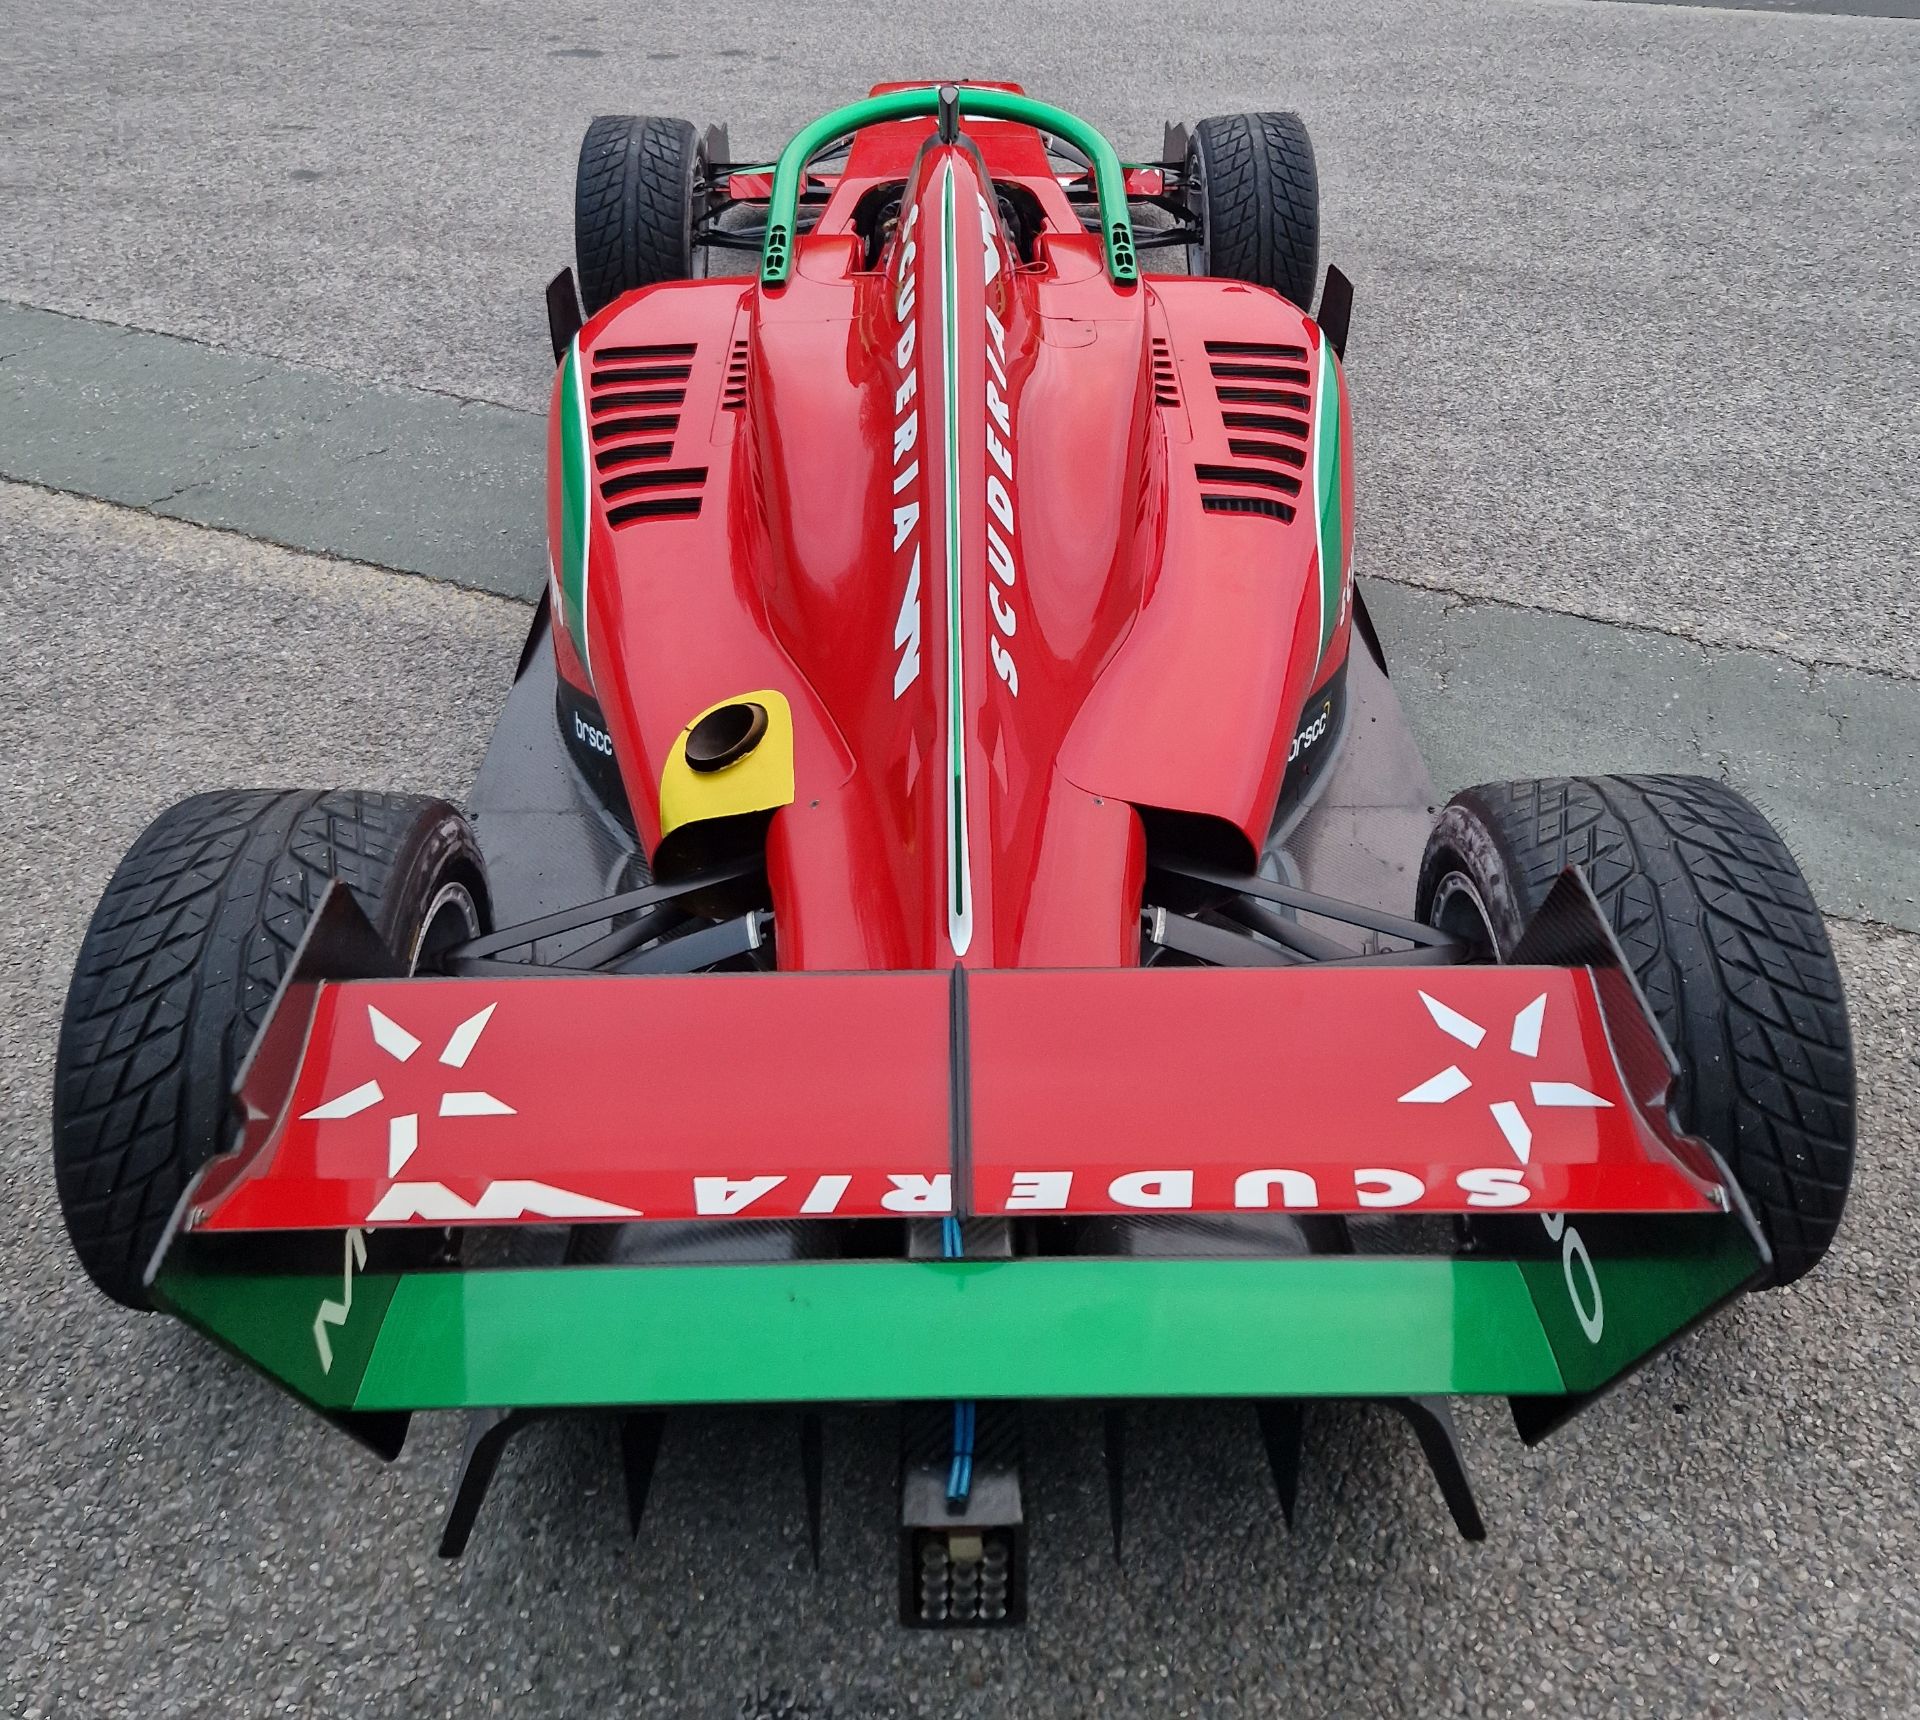 One TATUUS F3 T-318 Alfa Romeo Race Car Chassis No. 038 (2019) Finished in SCUDERIA Livery as Driven - Image 4 of 10